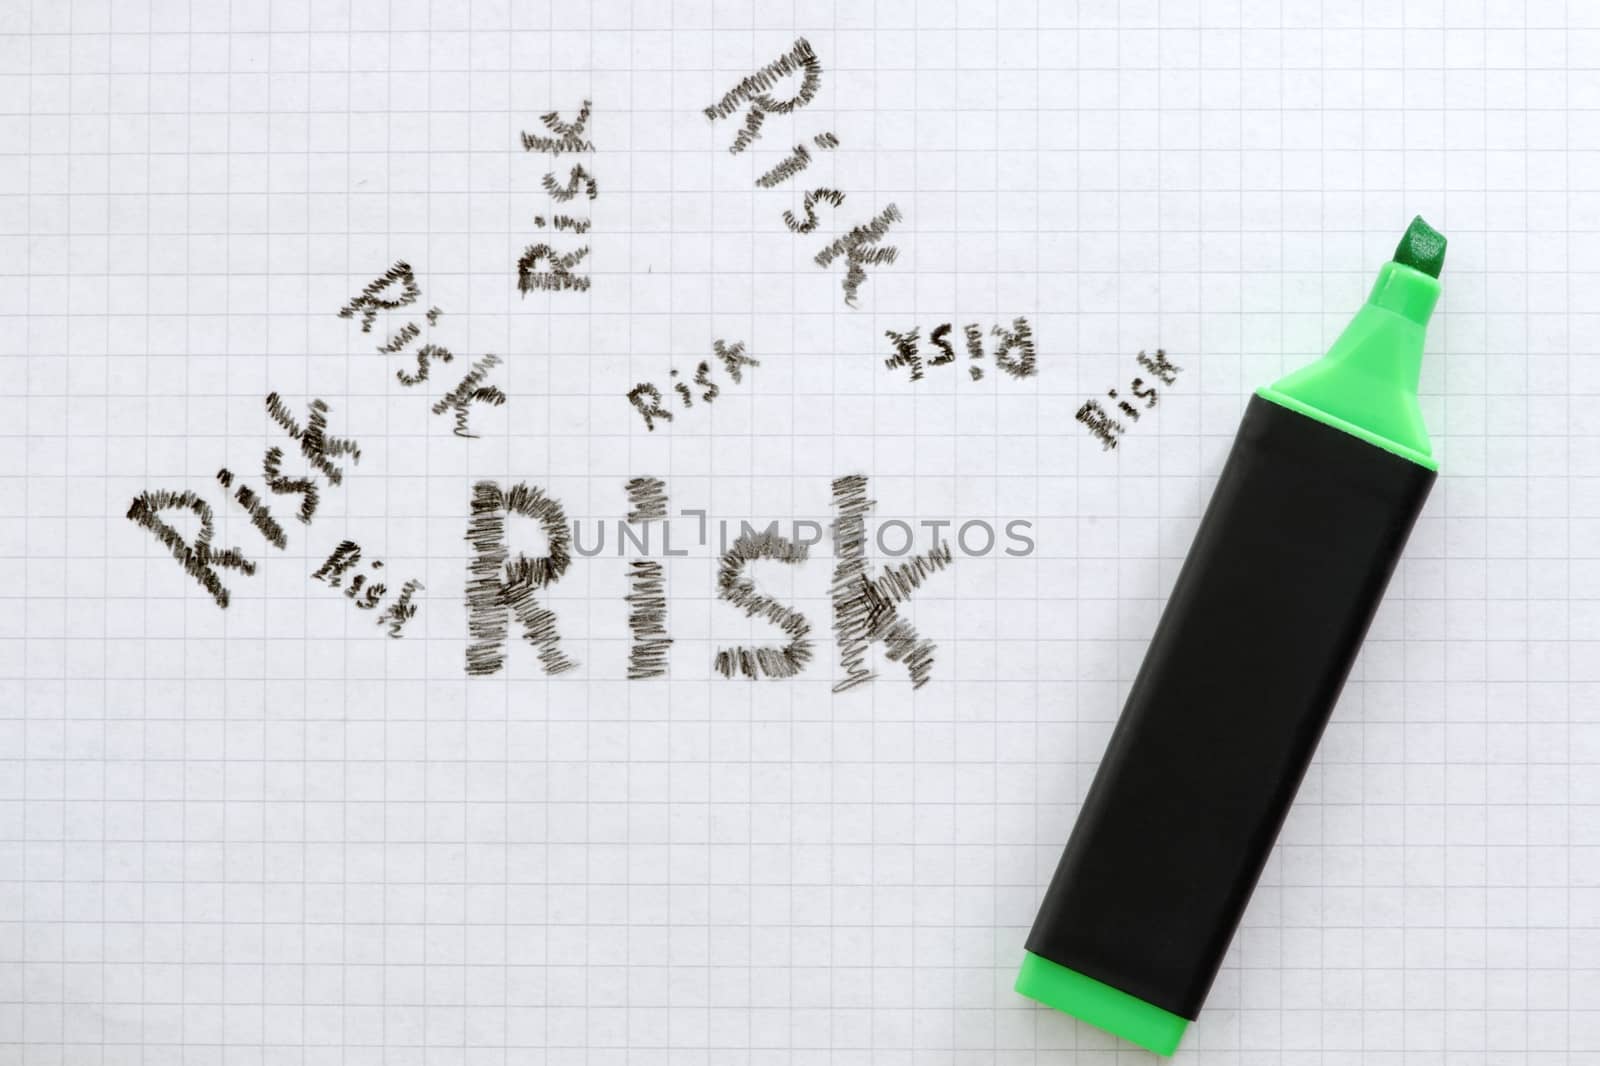 Risk business concept on white square paper and green marker.